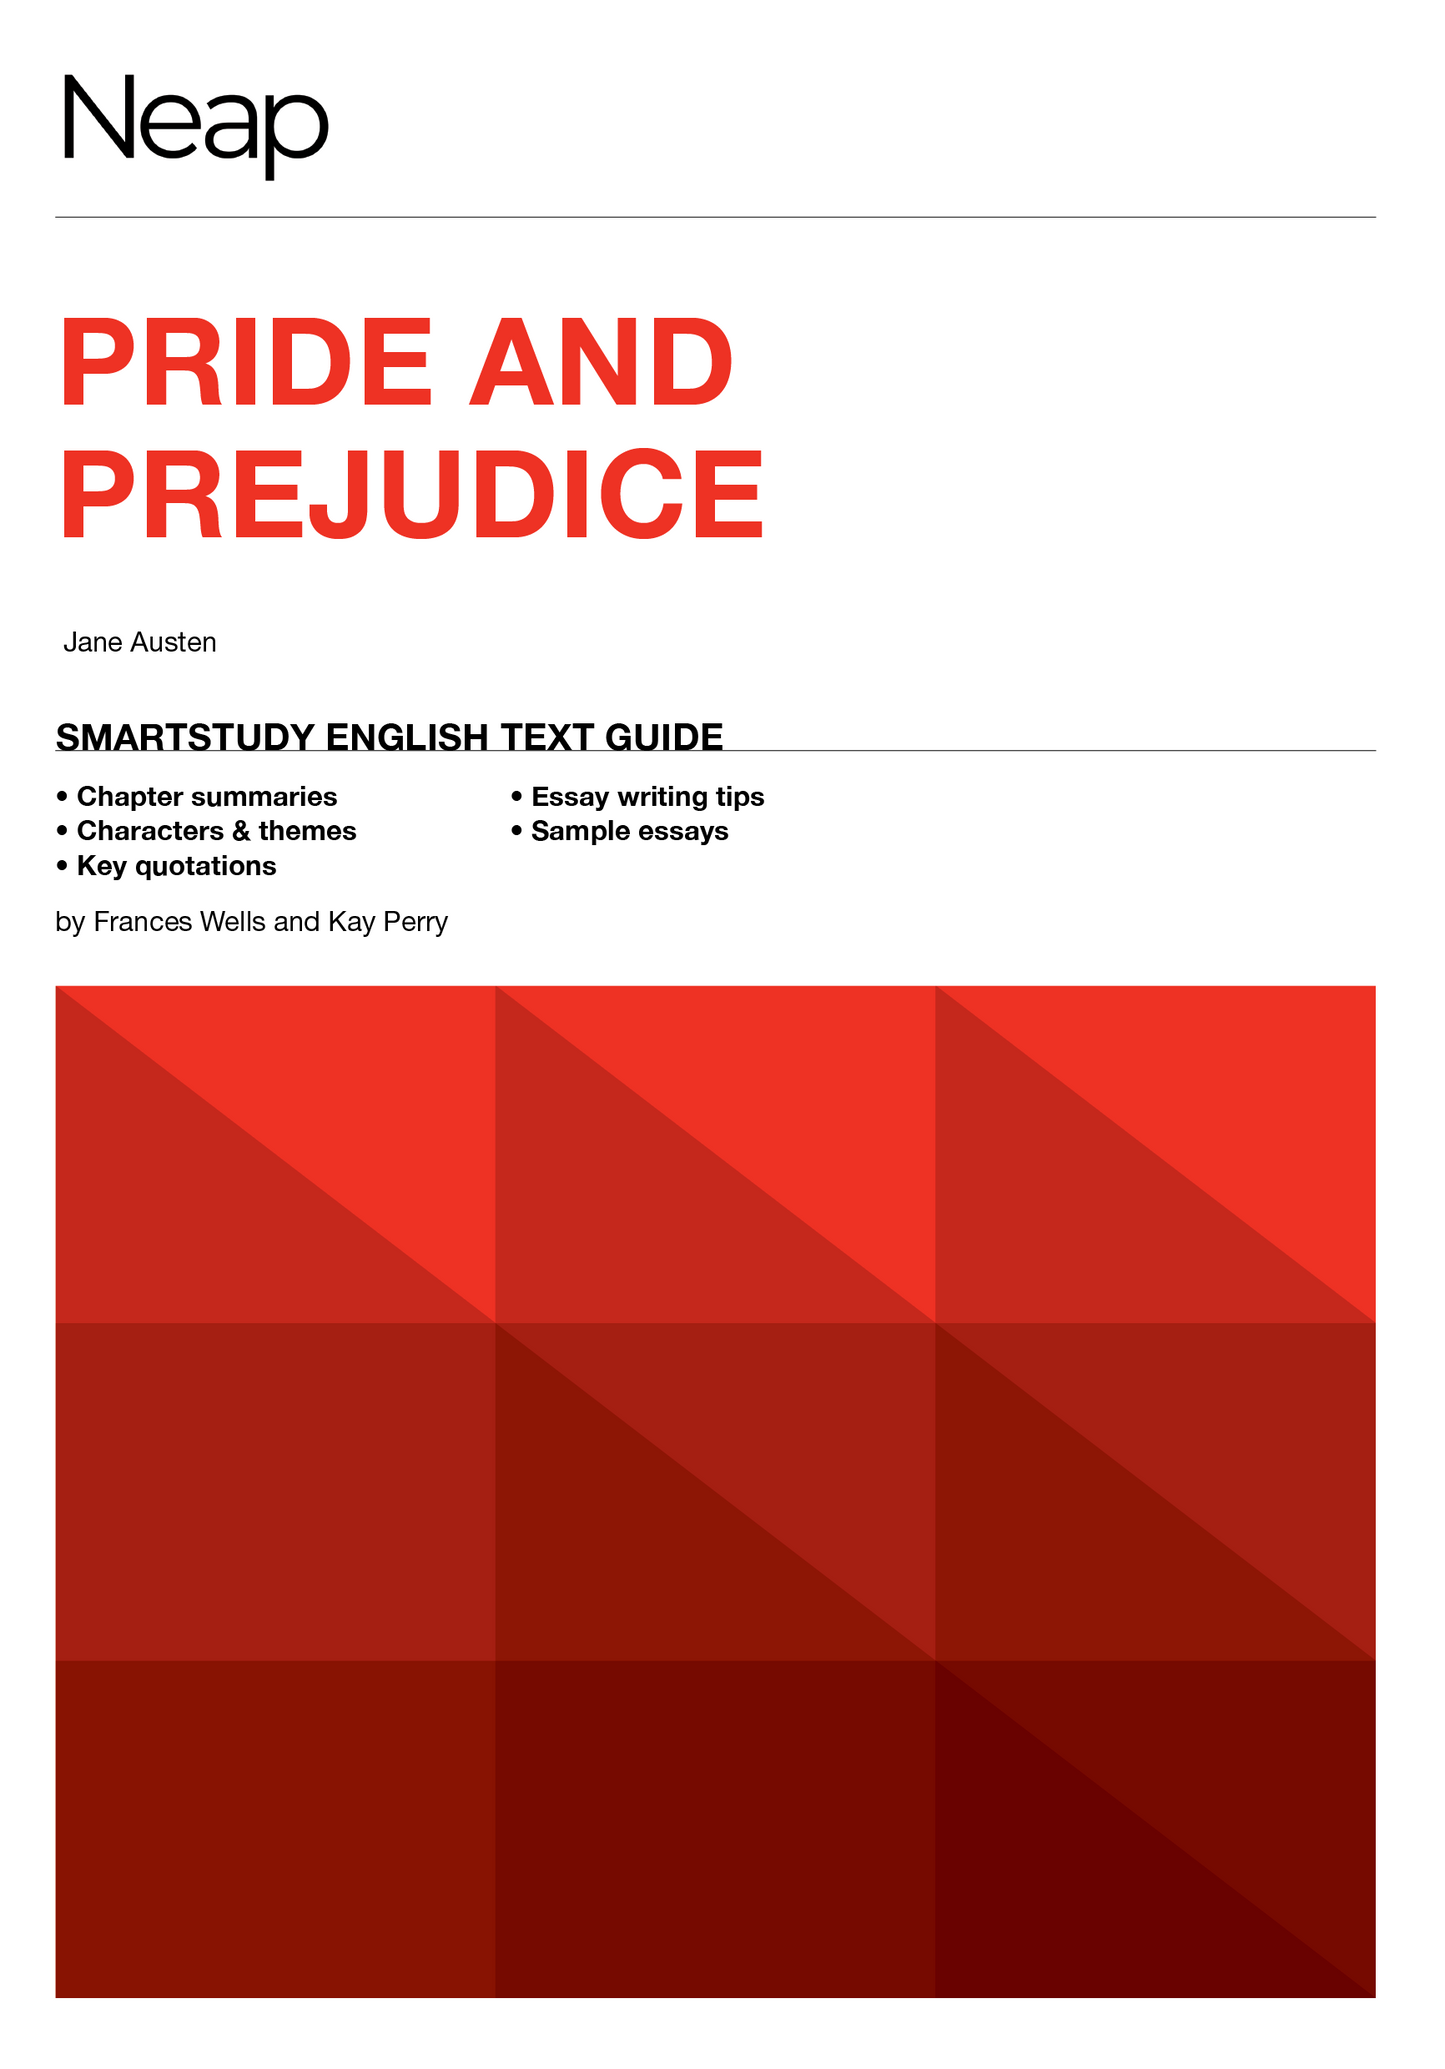 The NEAP Pride and Prejudice smartstudy Text Guide